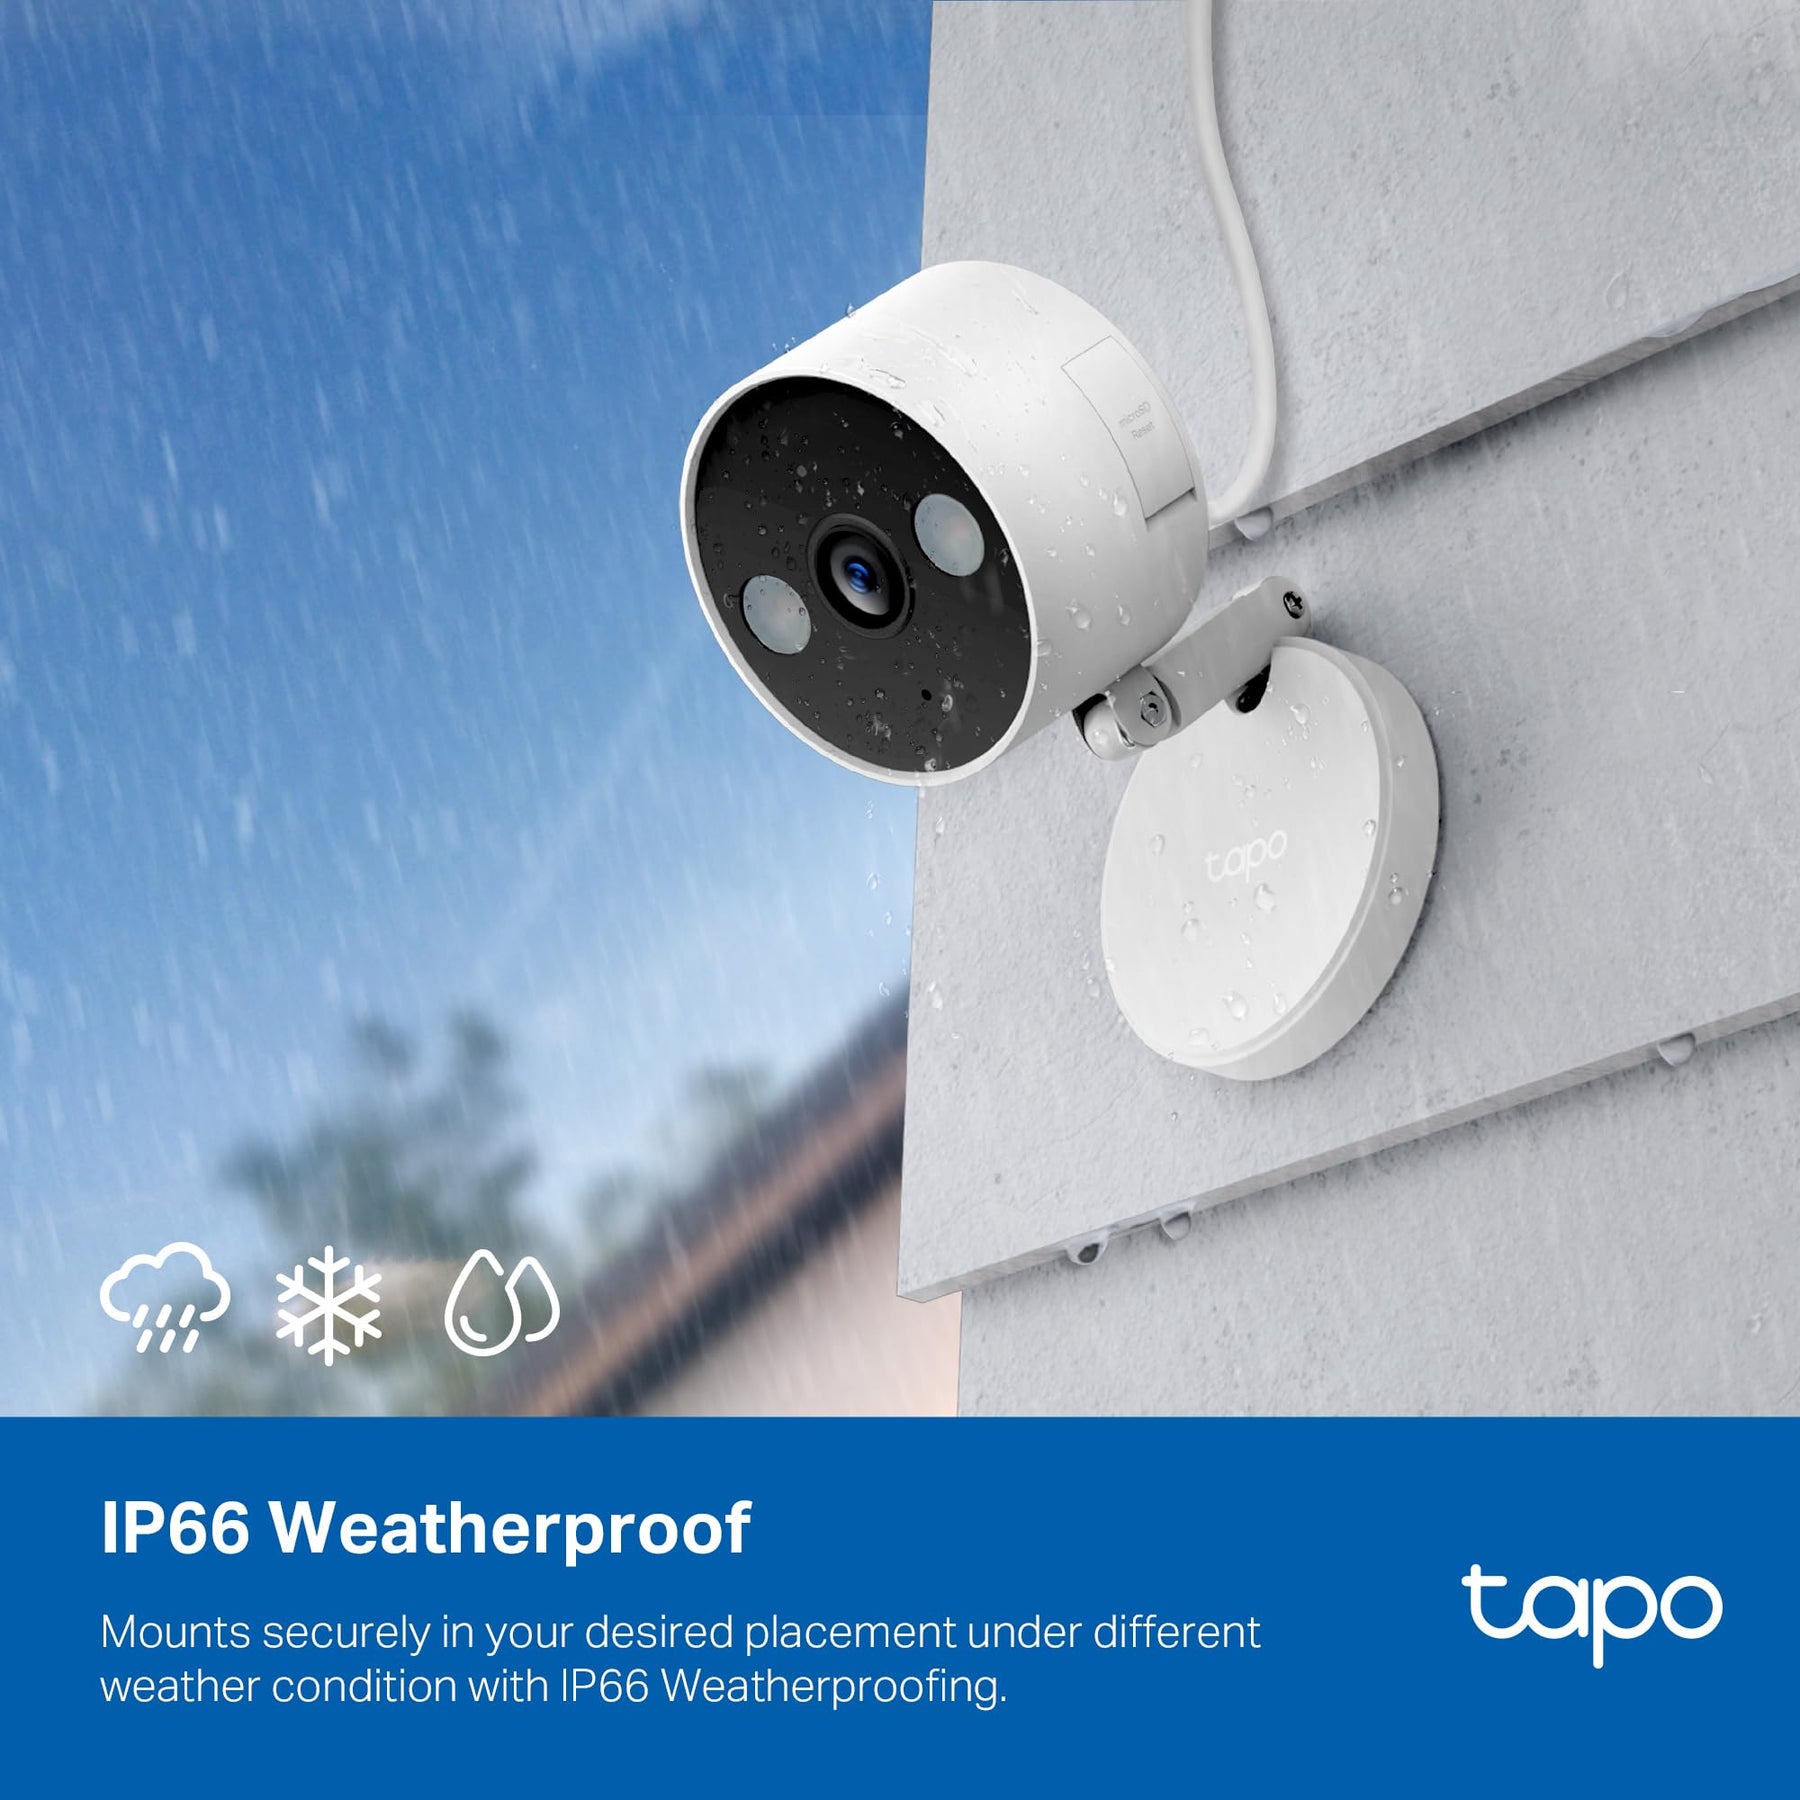 Tapo C120 -2K QHD Indoor/Outdoor Wired Security Camera